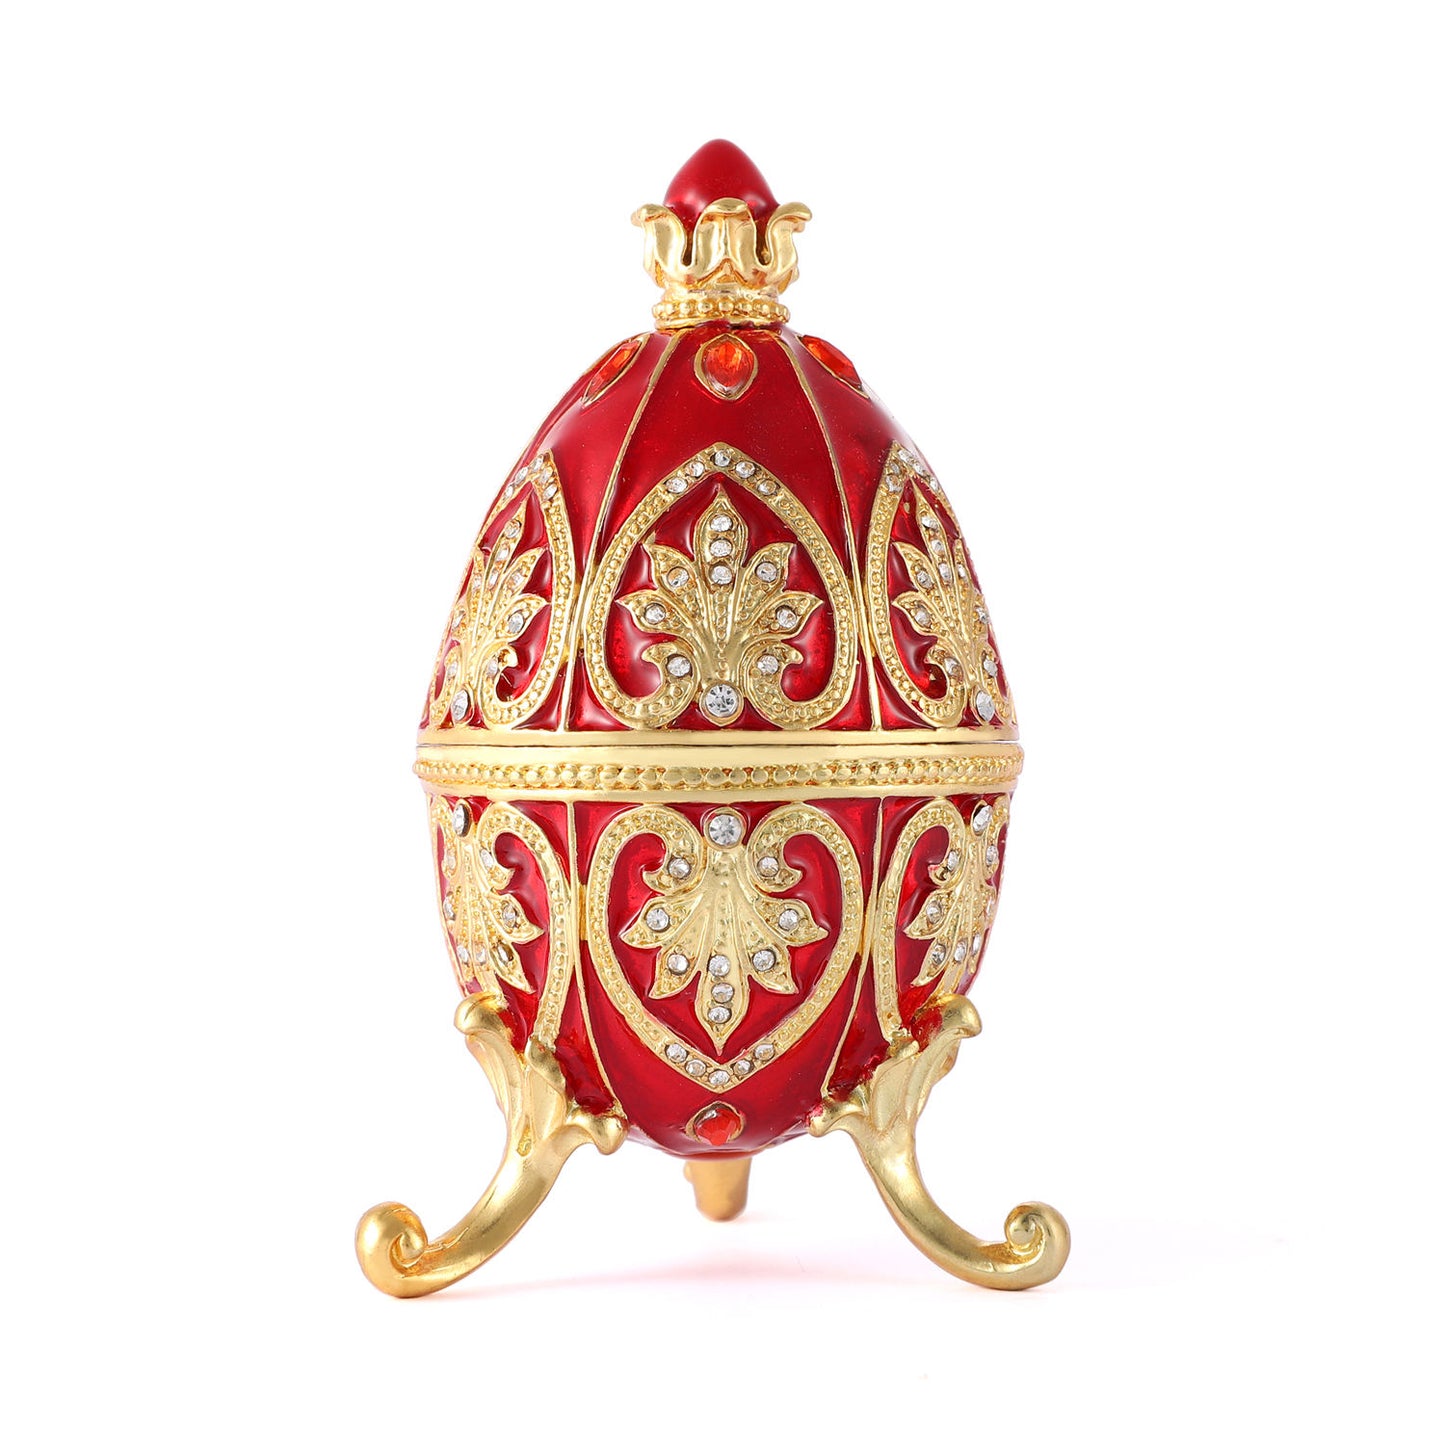 Faberge Eggs Exquisite Imitations Pushkin Collection